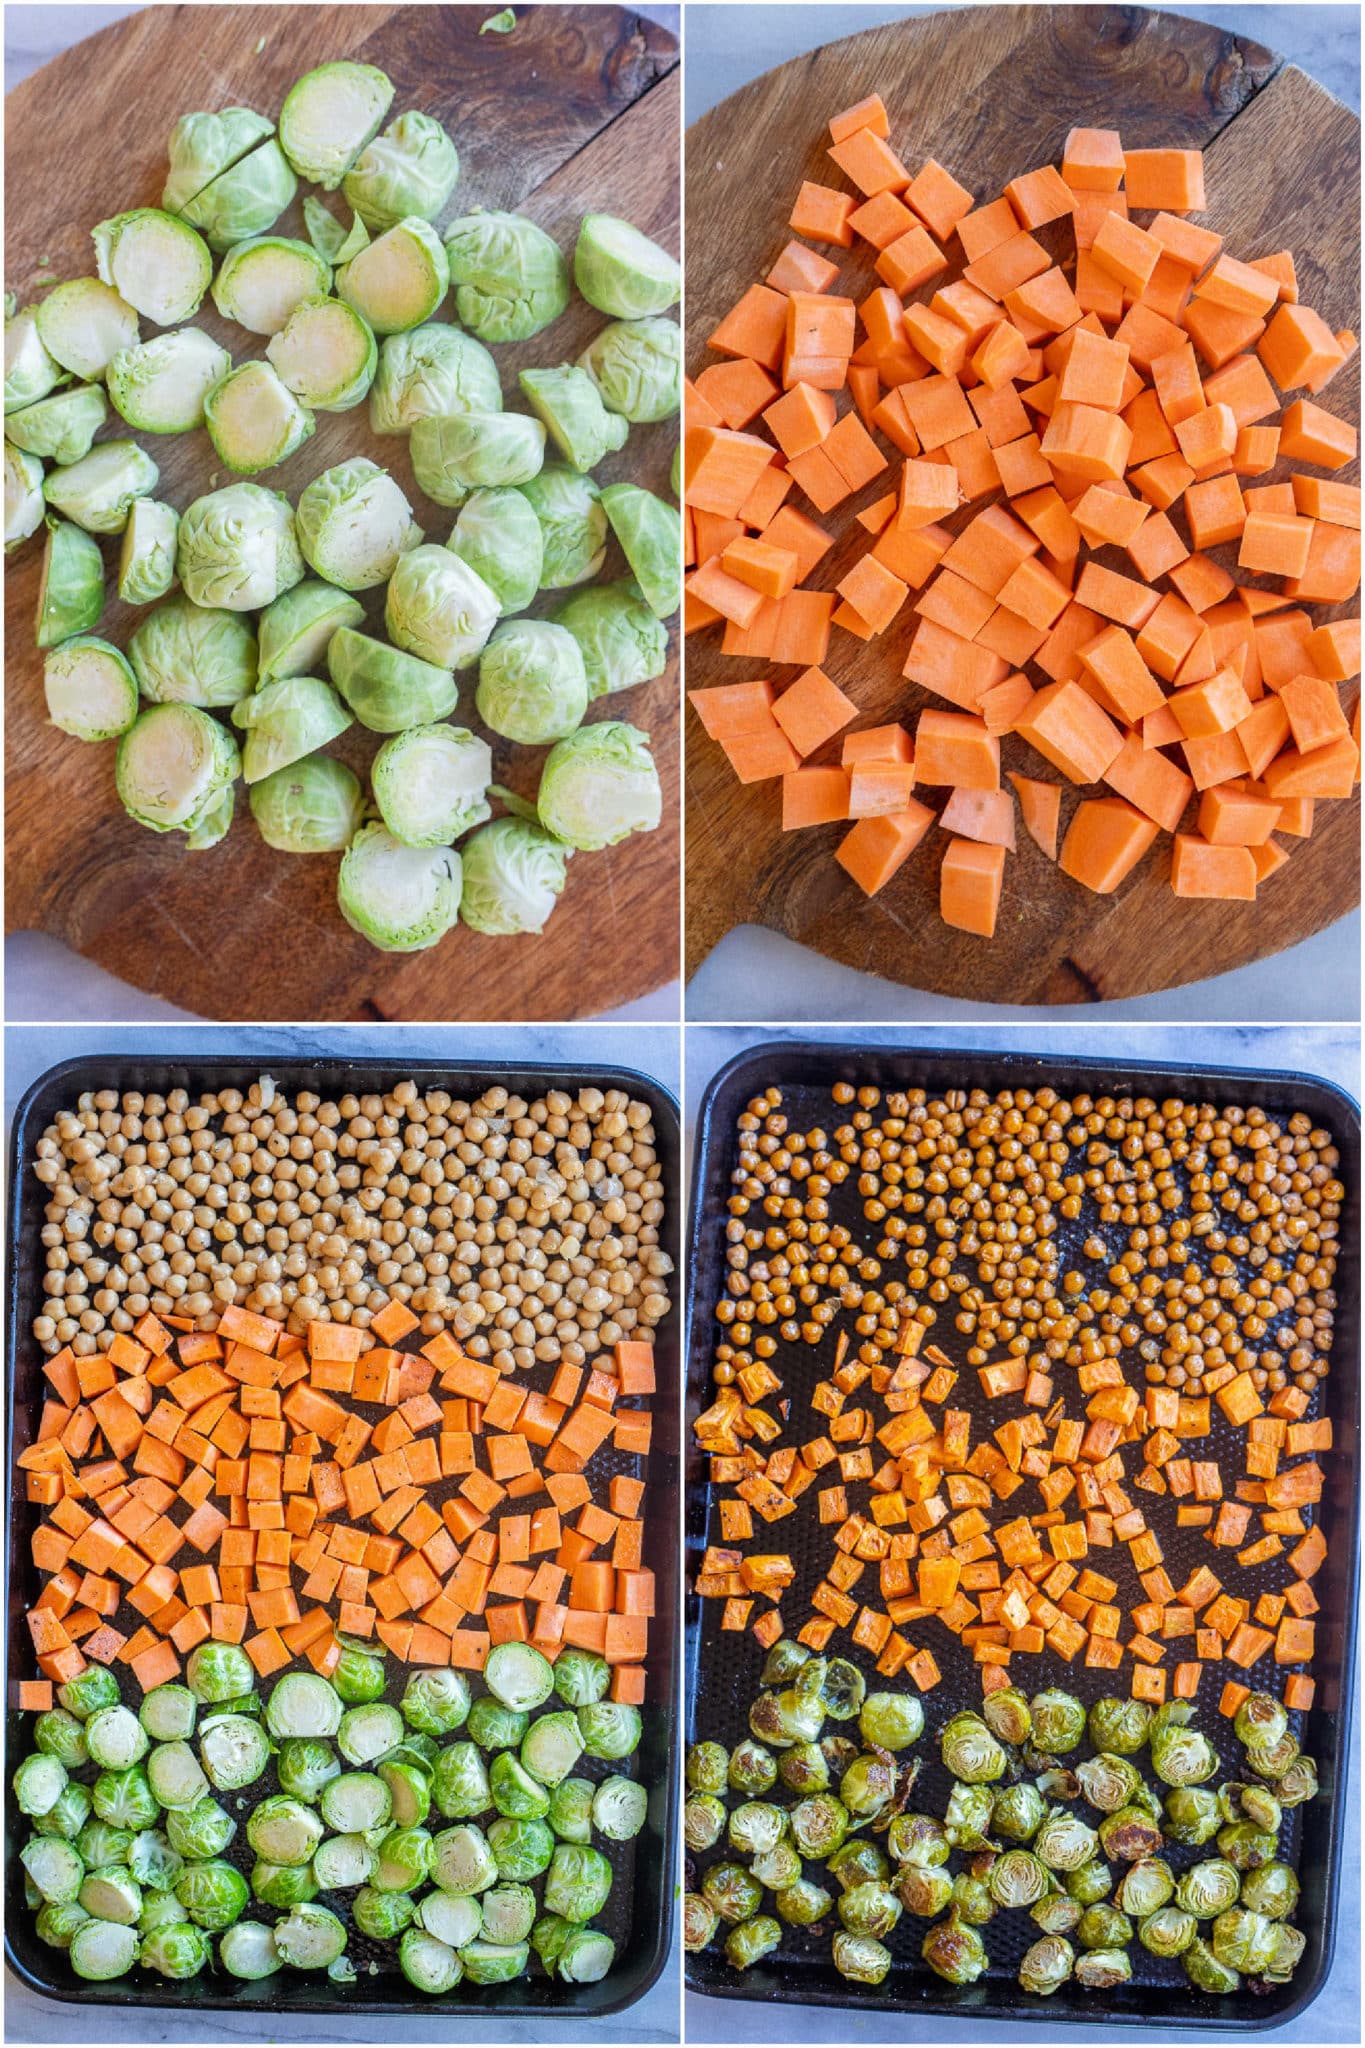 showing how to prepare the roasted veggies and chickpeas on a sheet pan